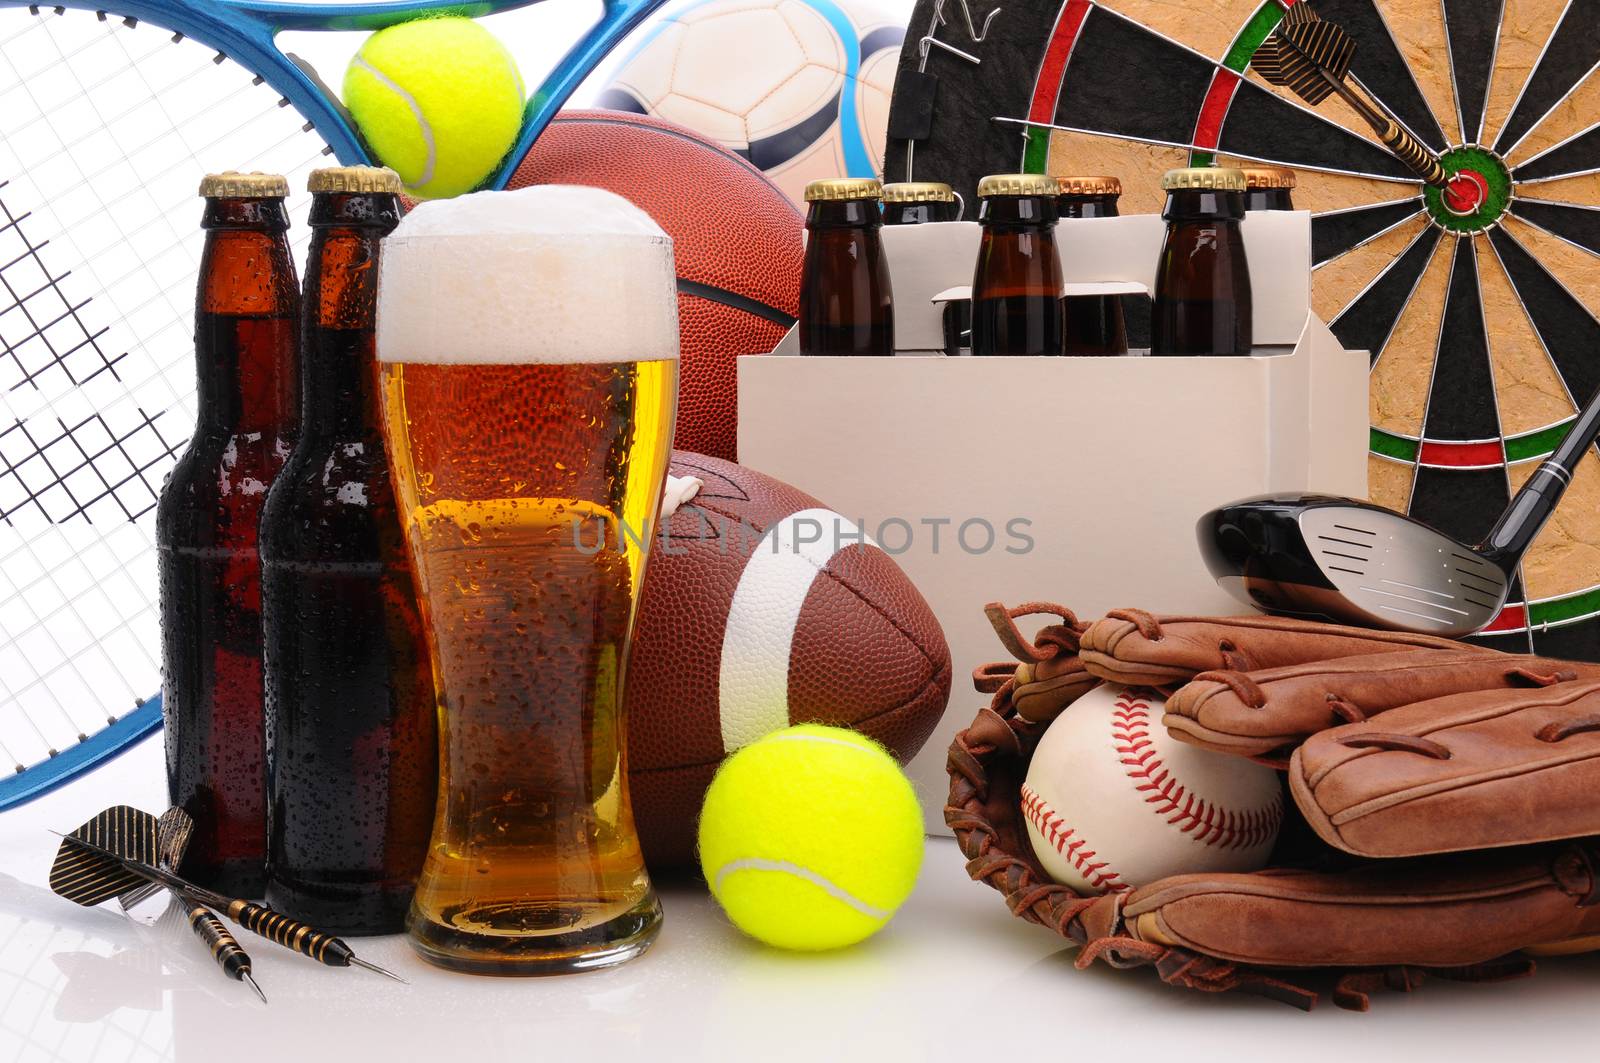 Six pack of beer and frothy glass surrounded by sports equipment. Horizontal Format Filling the frame. Sports represented include, football, basketball, soccer, darts, baseball, tennis and golf.